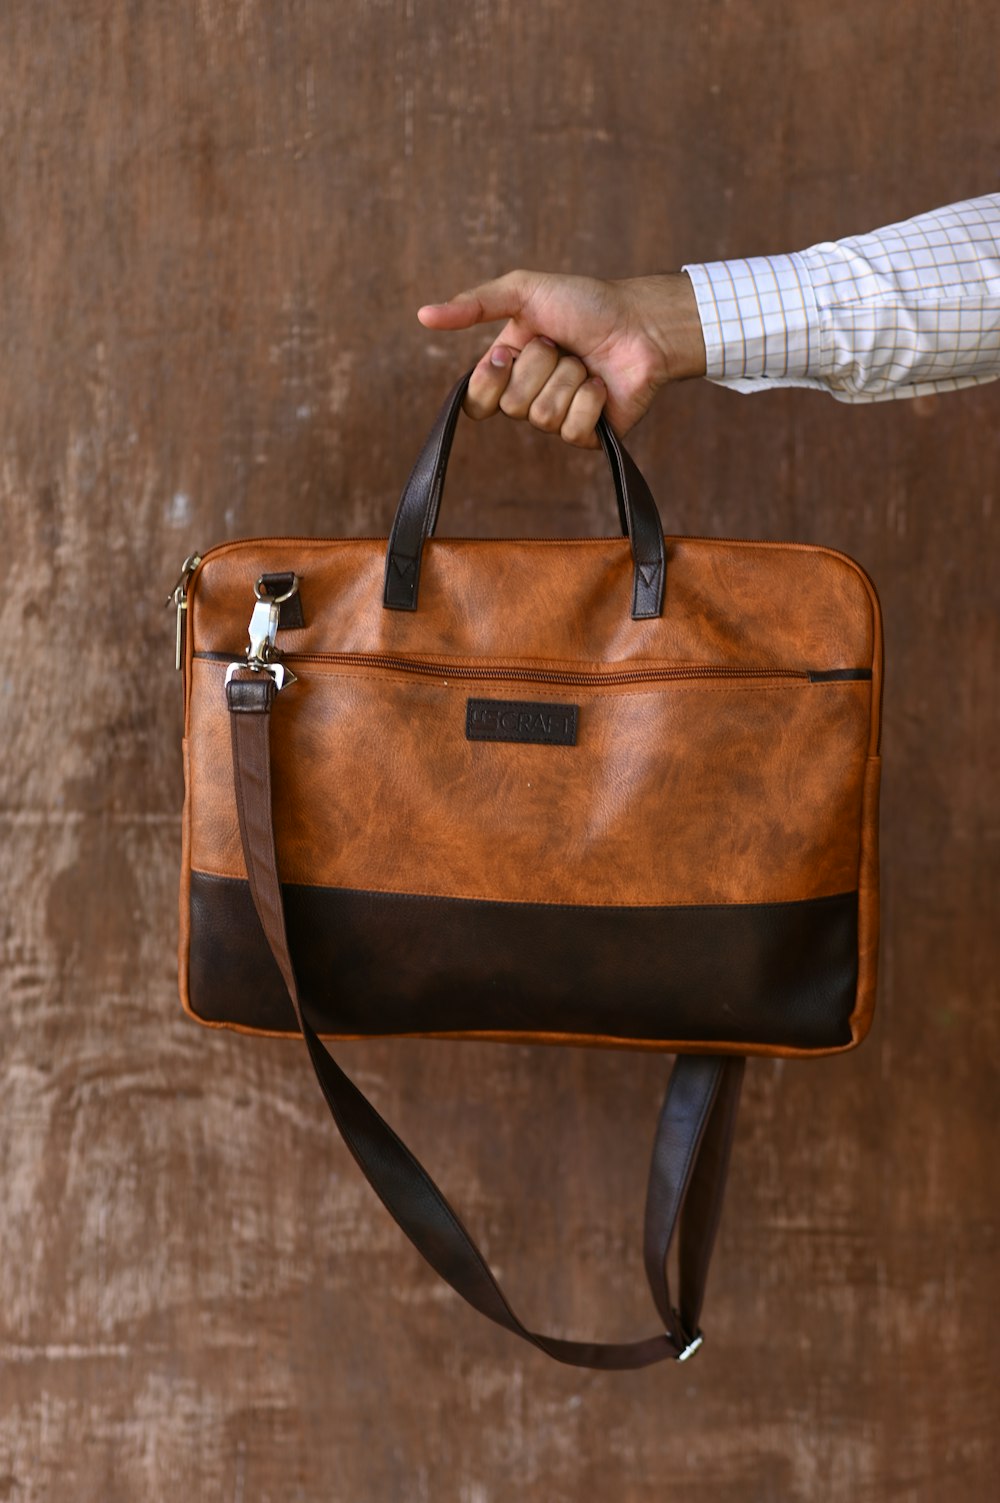 person holding brown leather sling bag